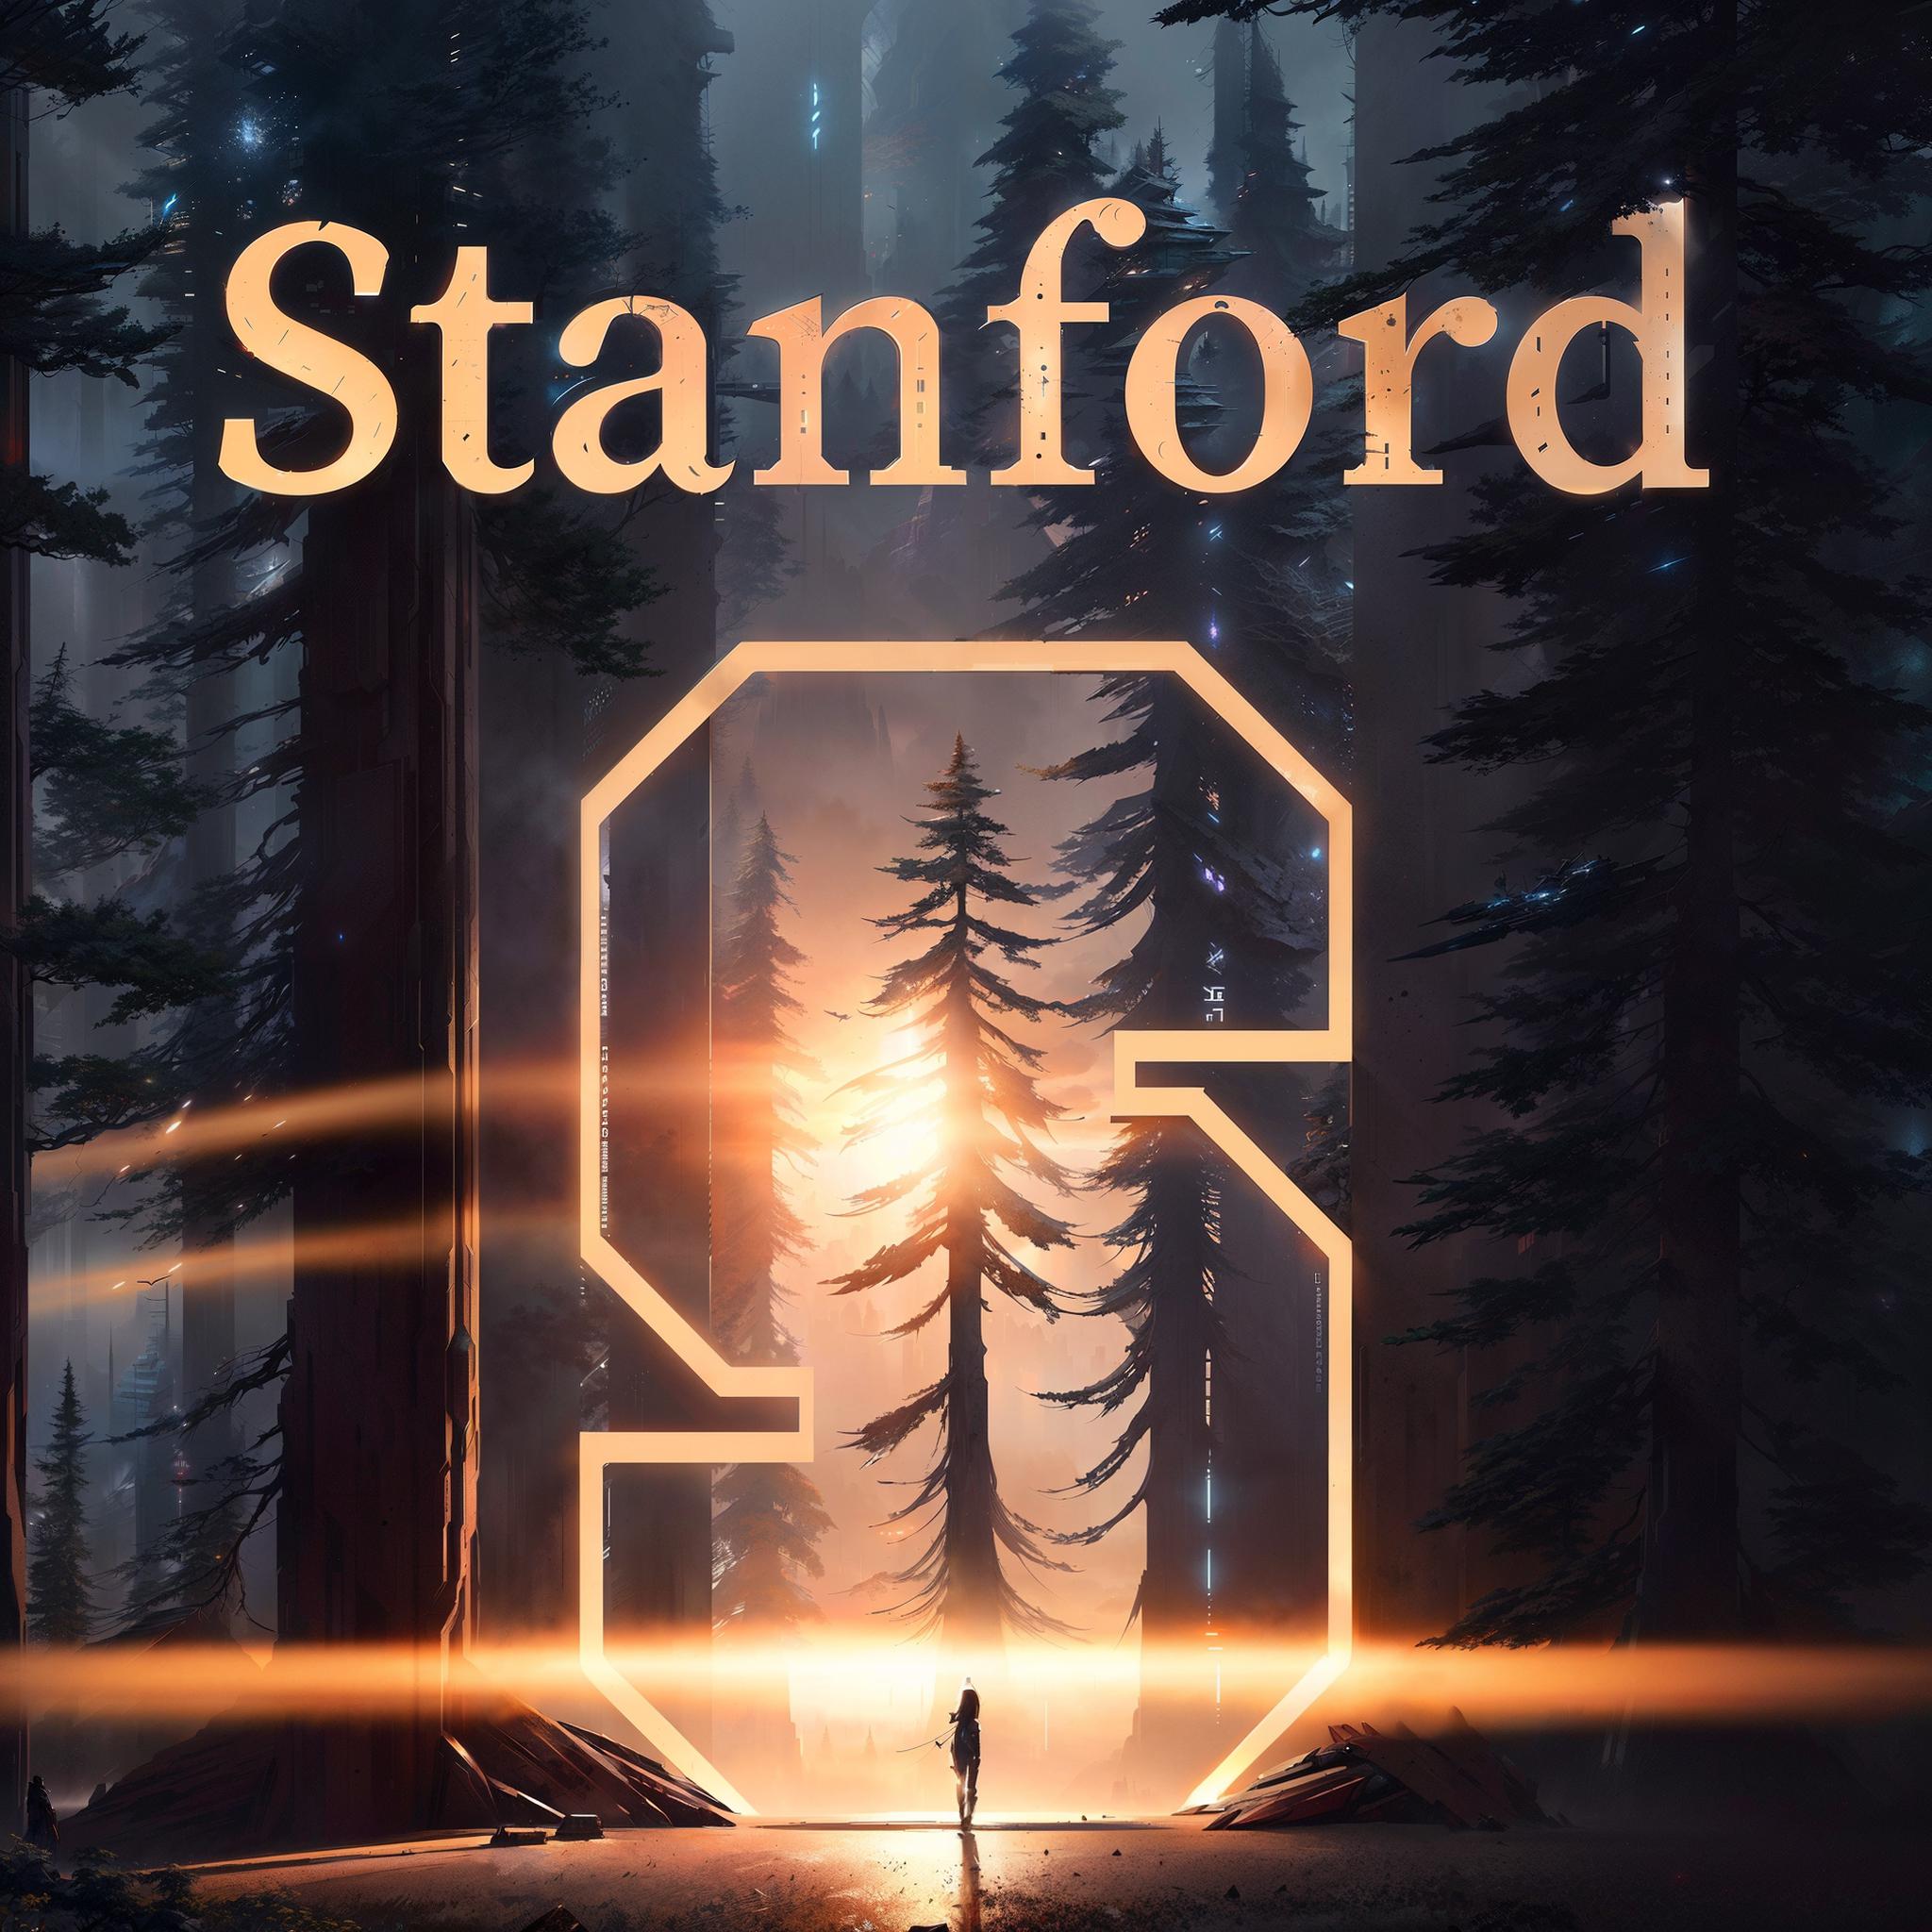 Stanford's cover art, featuring a person standing in a forest with the Stanford S behind them. - Stanford